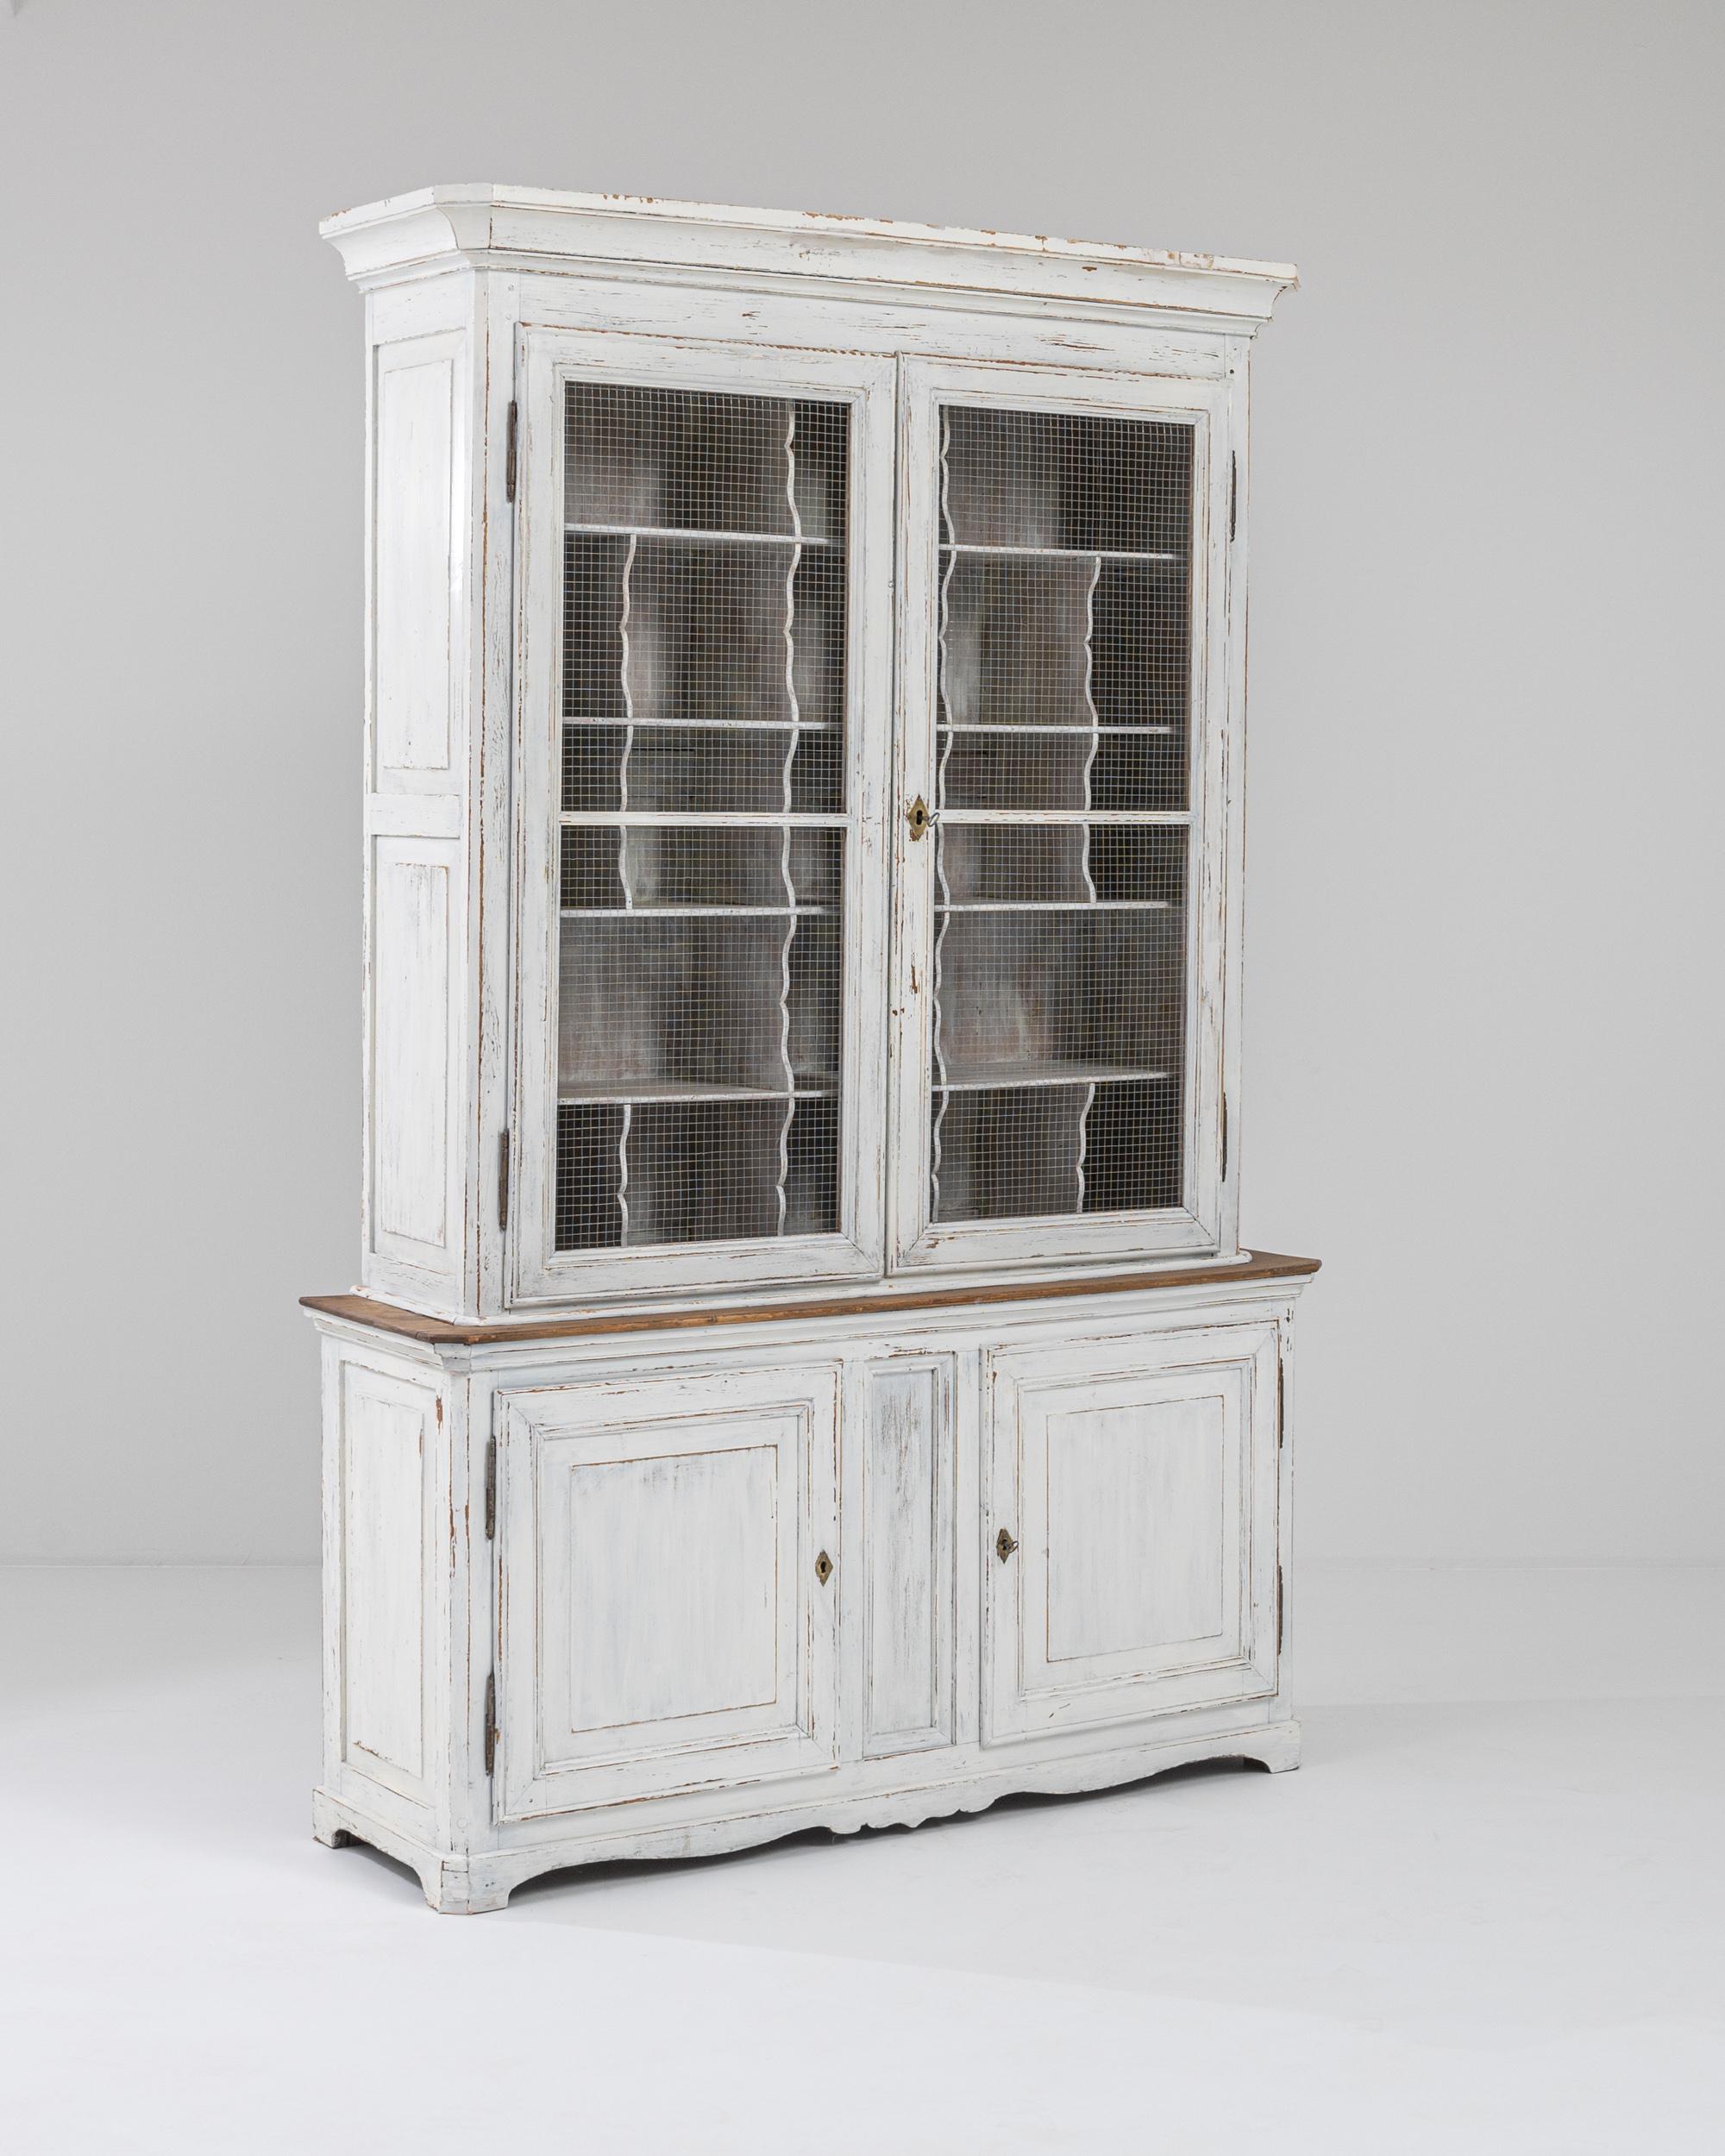 This Provincial wooden cabinet combines a unique design with a nostalgic patina to enchanting effect. Made in France at the turn of the century, the metal grill which fronts the upper cabinet indicates that this piece would have originally been used